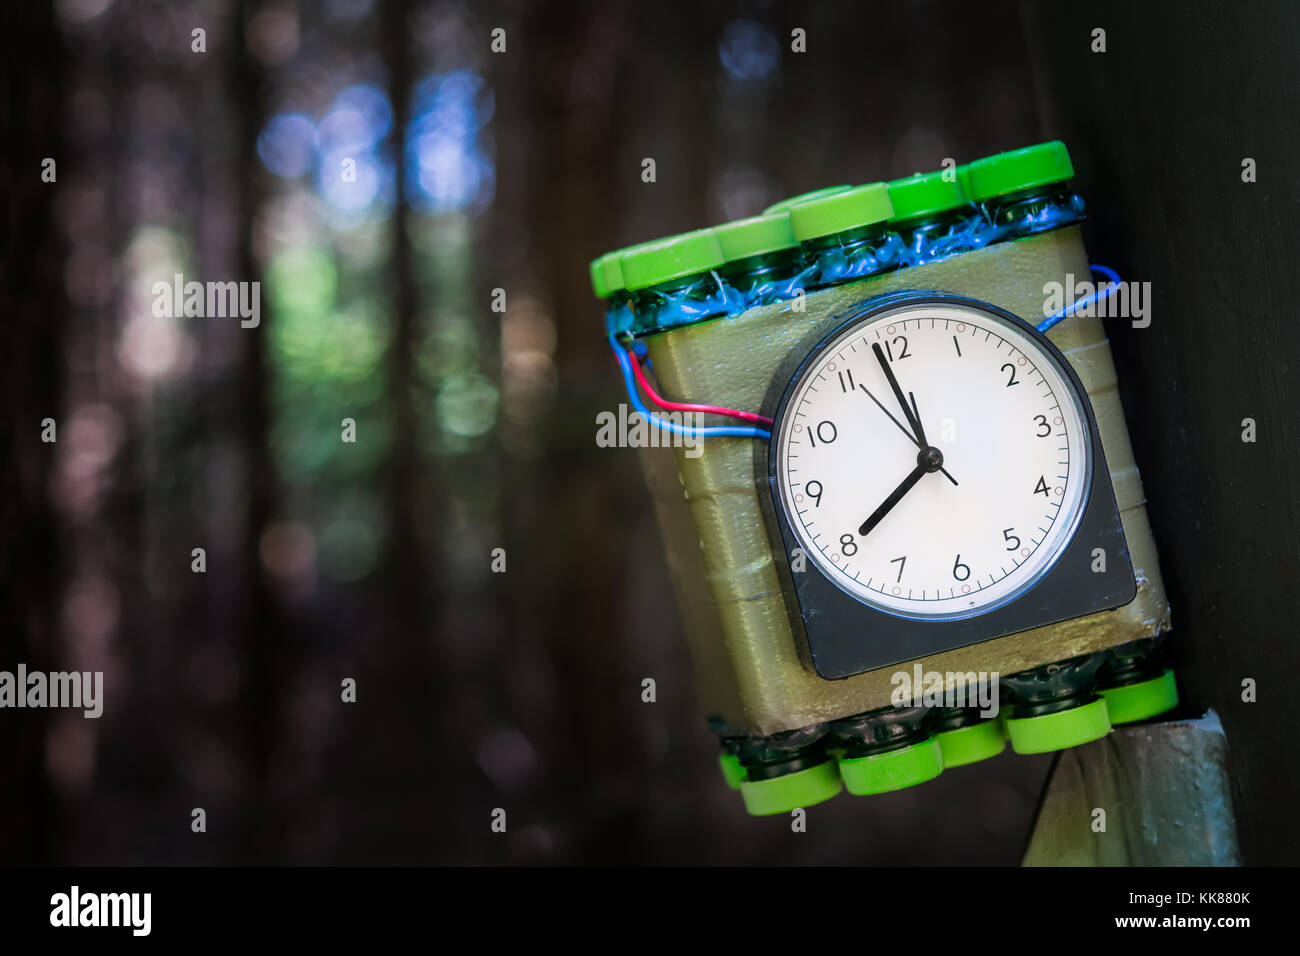 Imitation of timed bomb. Terrorist attack concept. Dangerous explosive placed at metal construction with bokeh background. Stock Photo